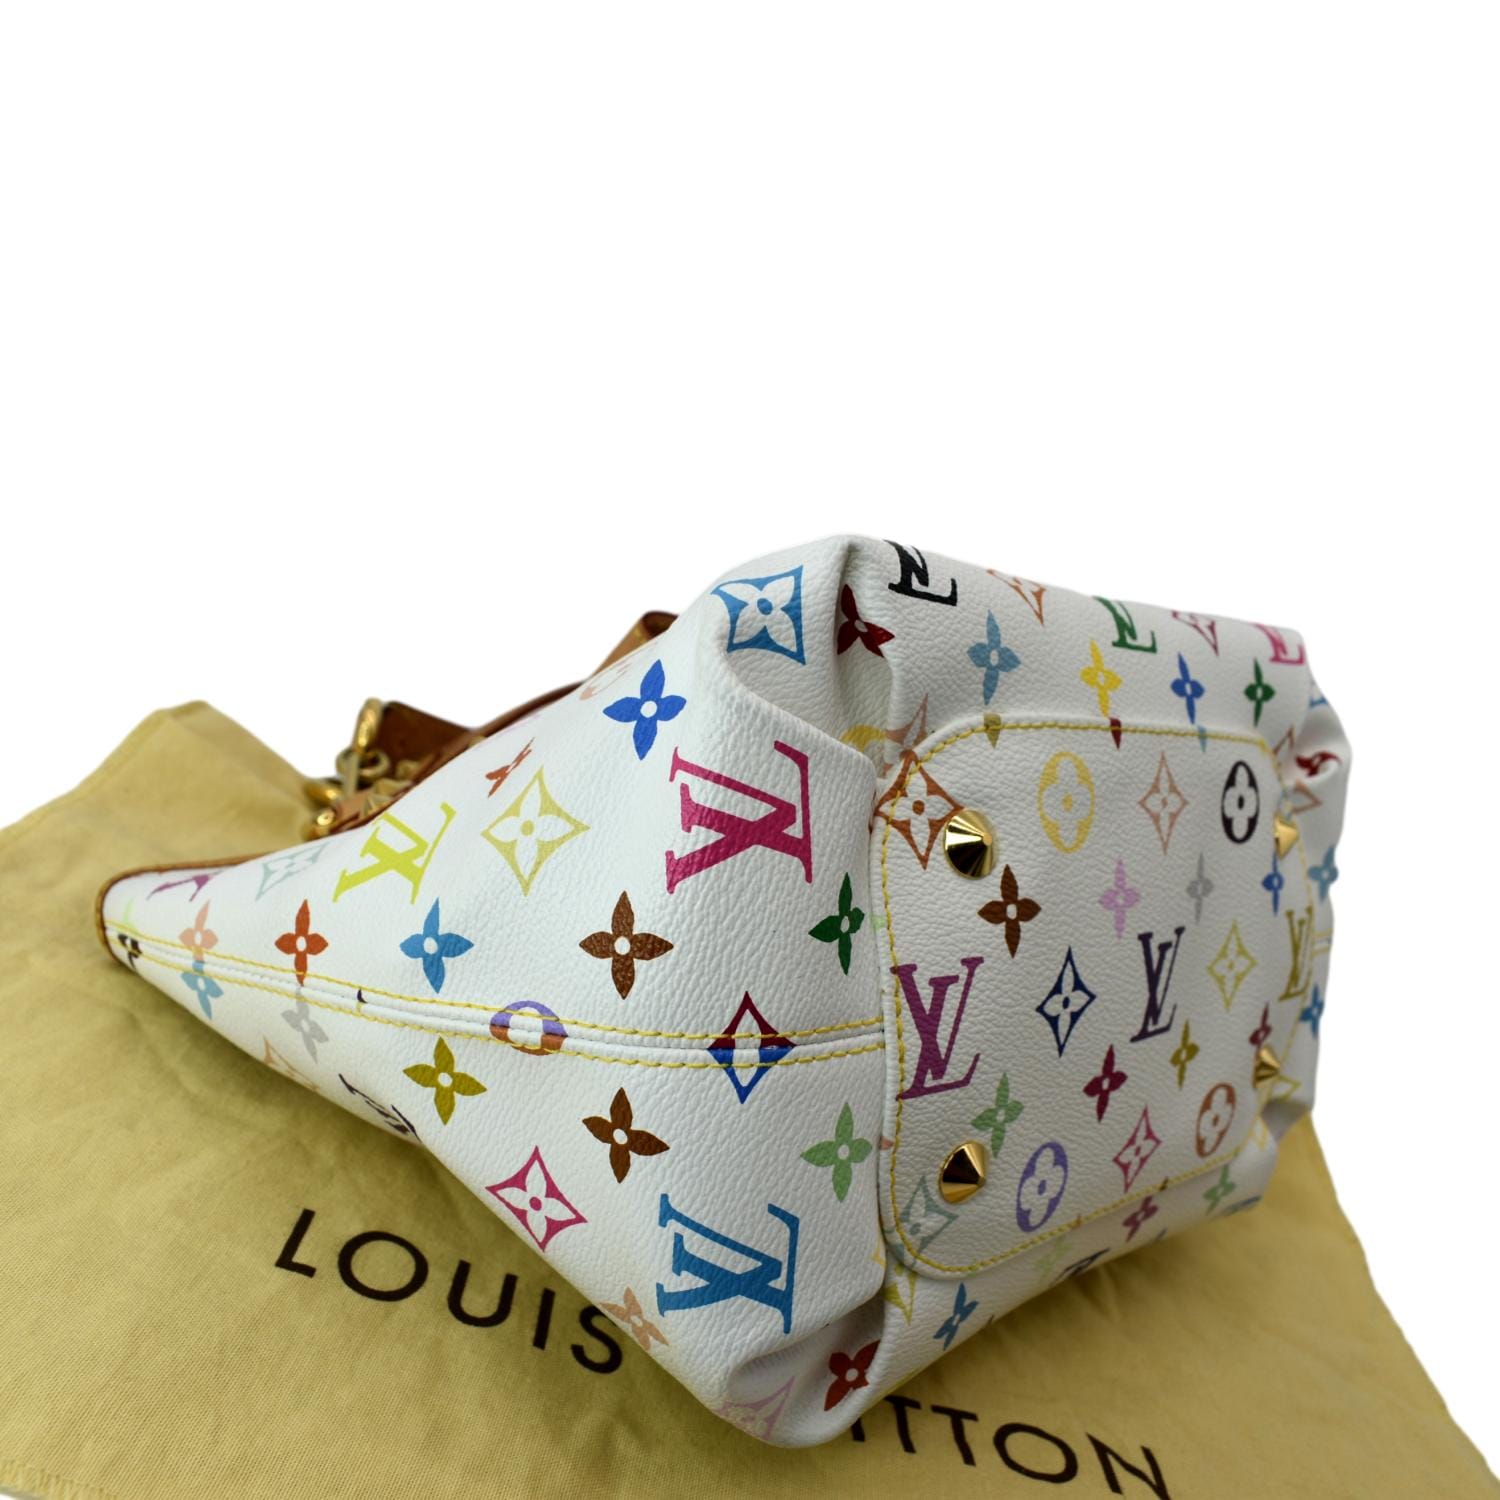 Can't get enough of Louis Vuitton Monogram 🤩 From shoulder bags